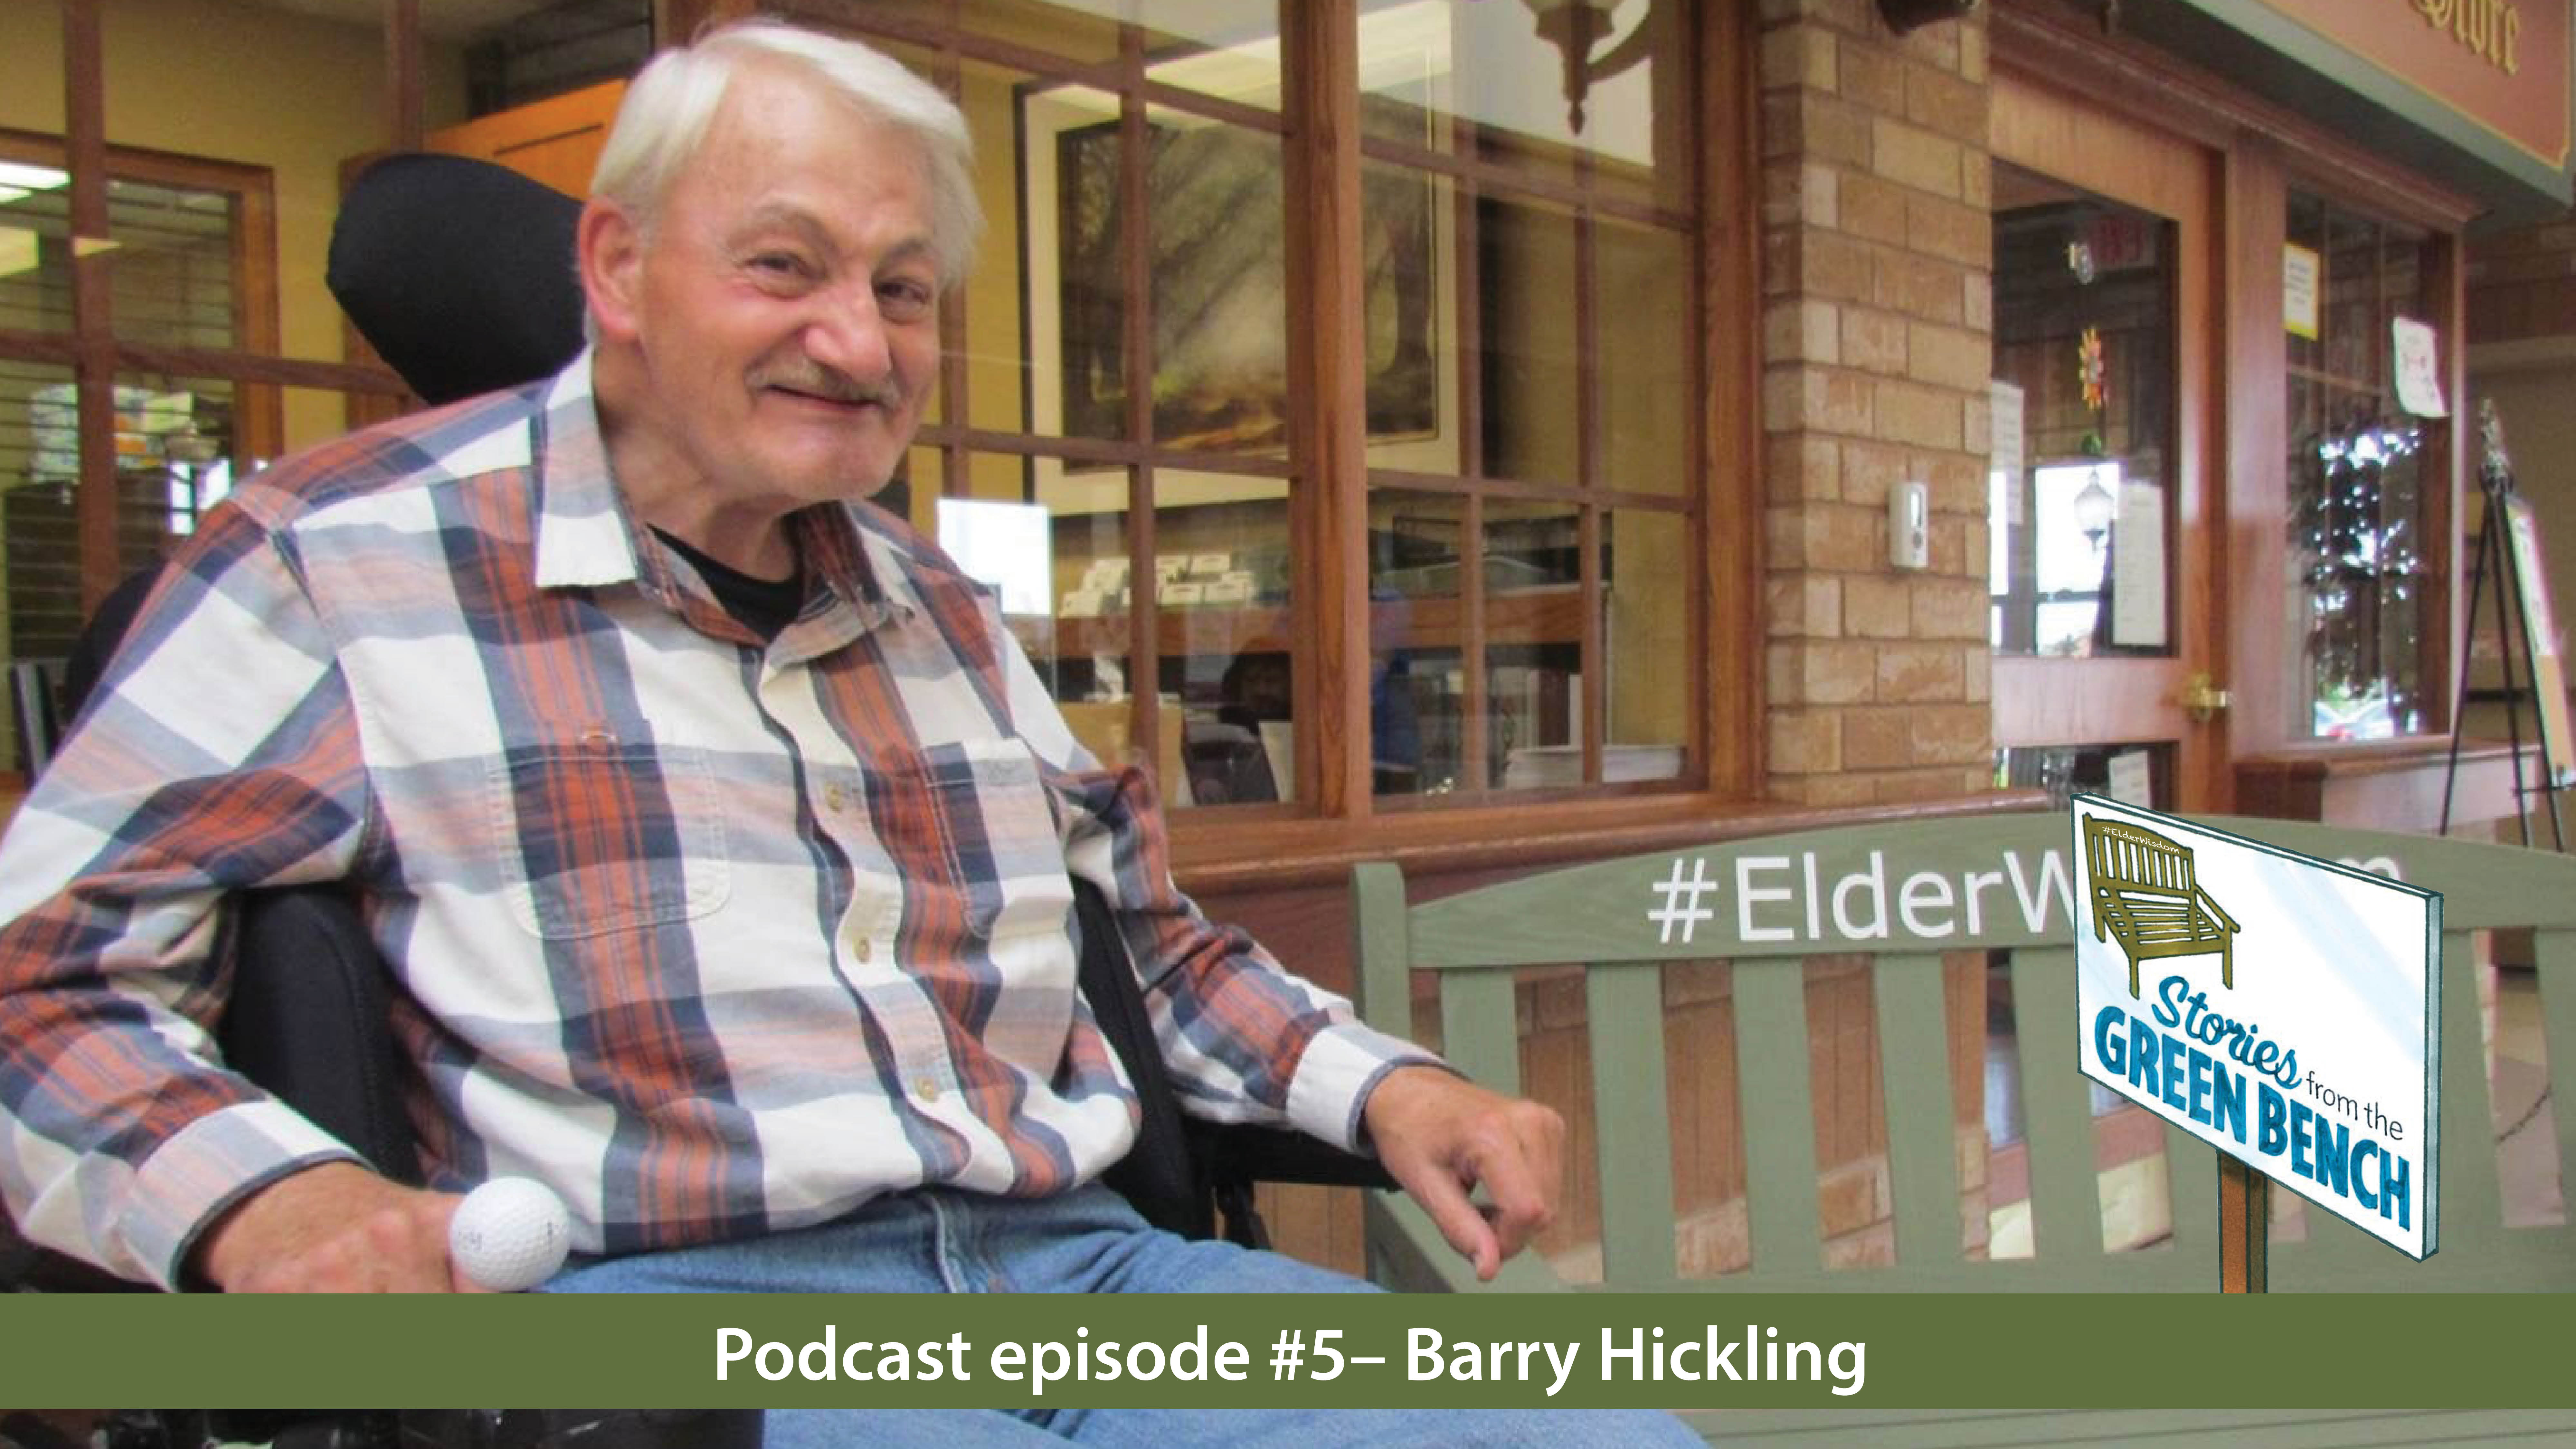 Barry sitting with the green bench in promotion of the #elderwisdom podcast